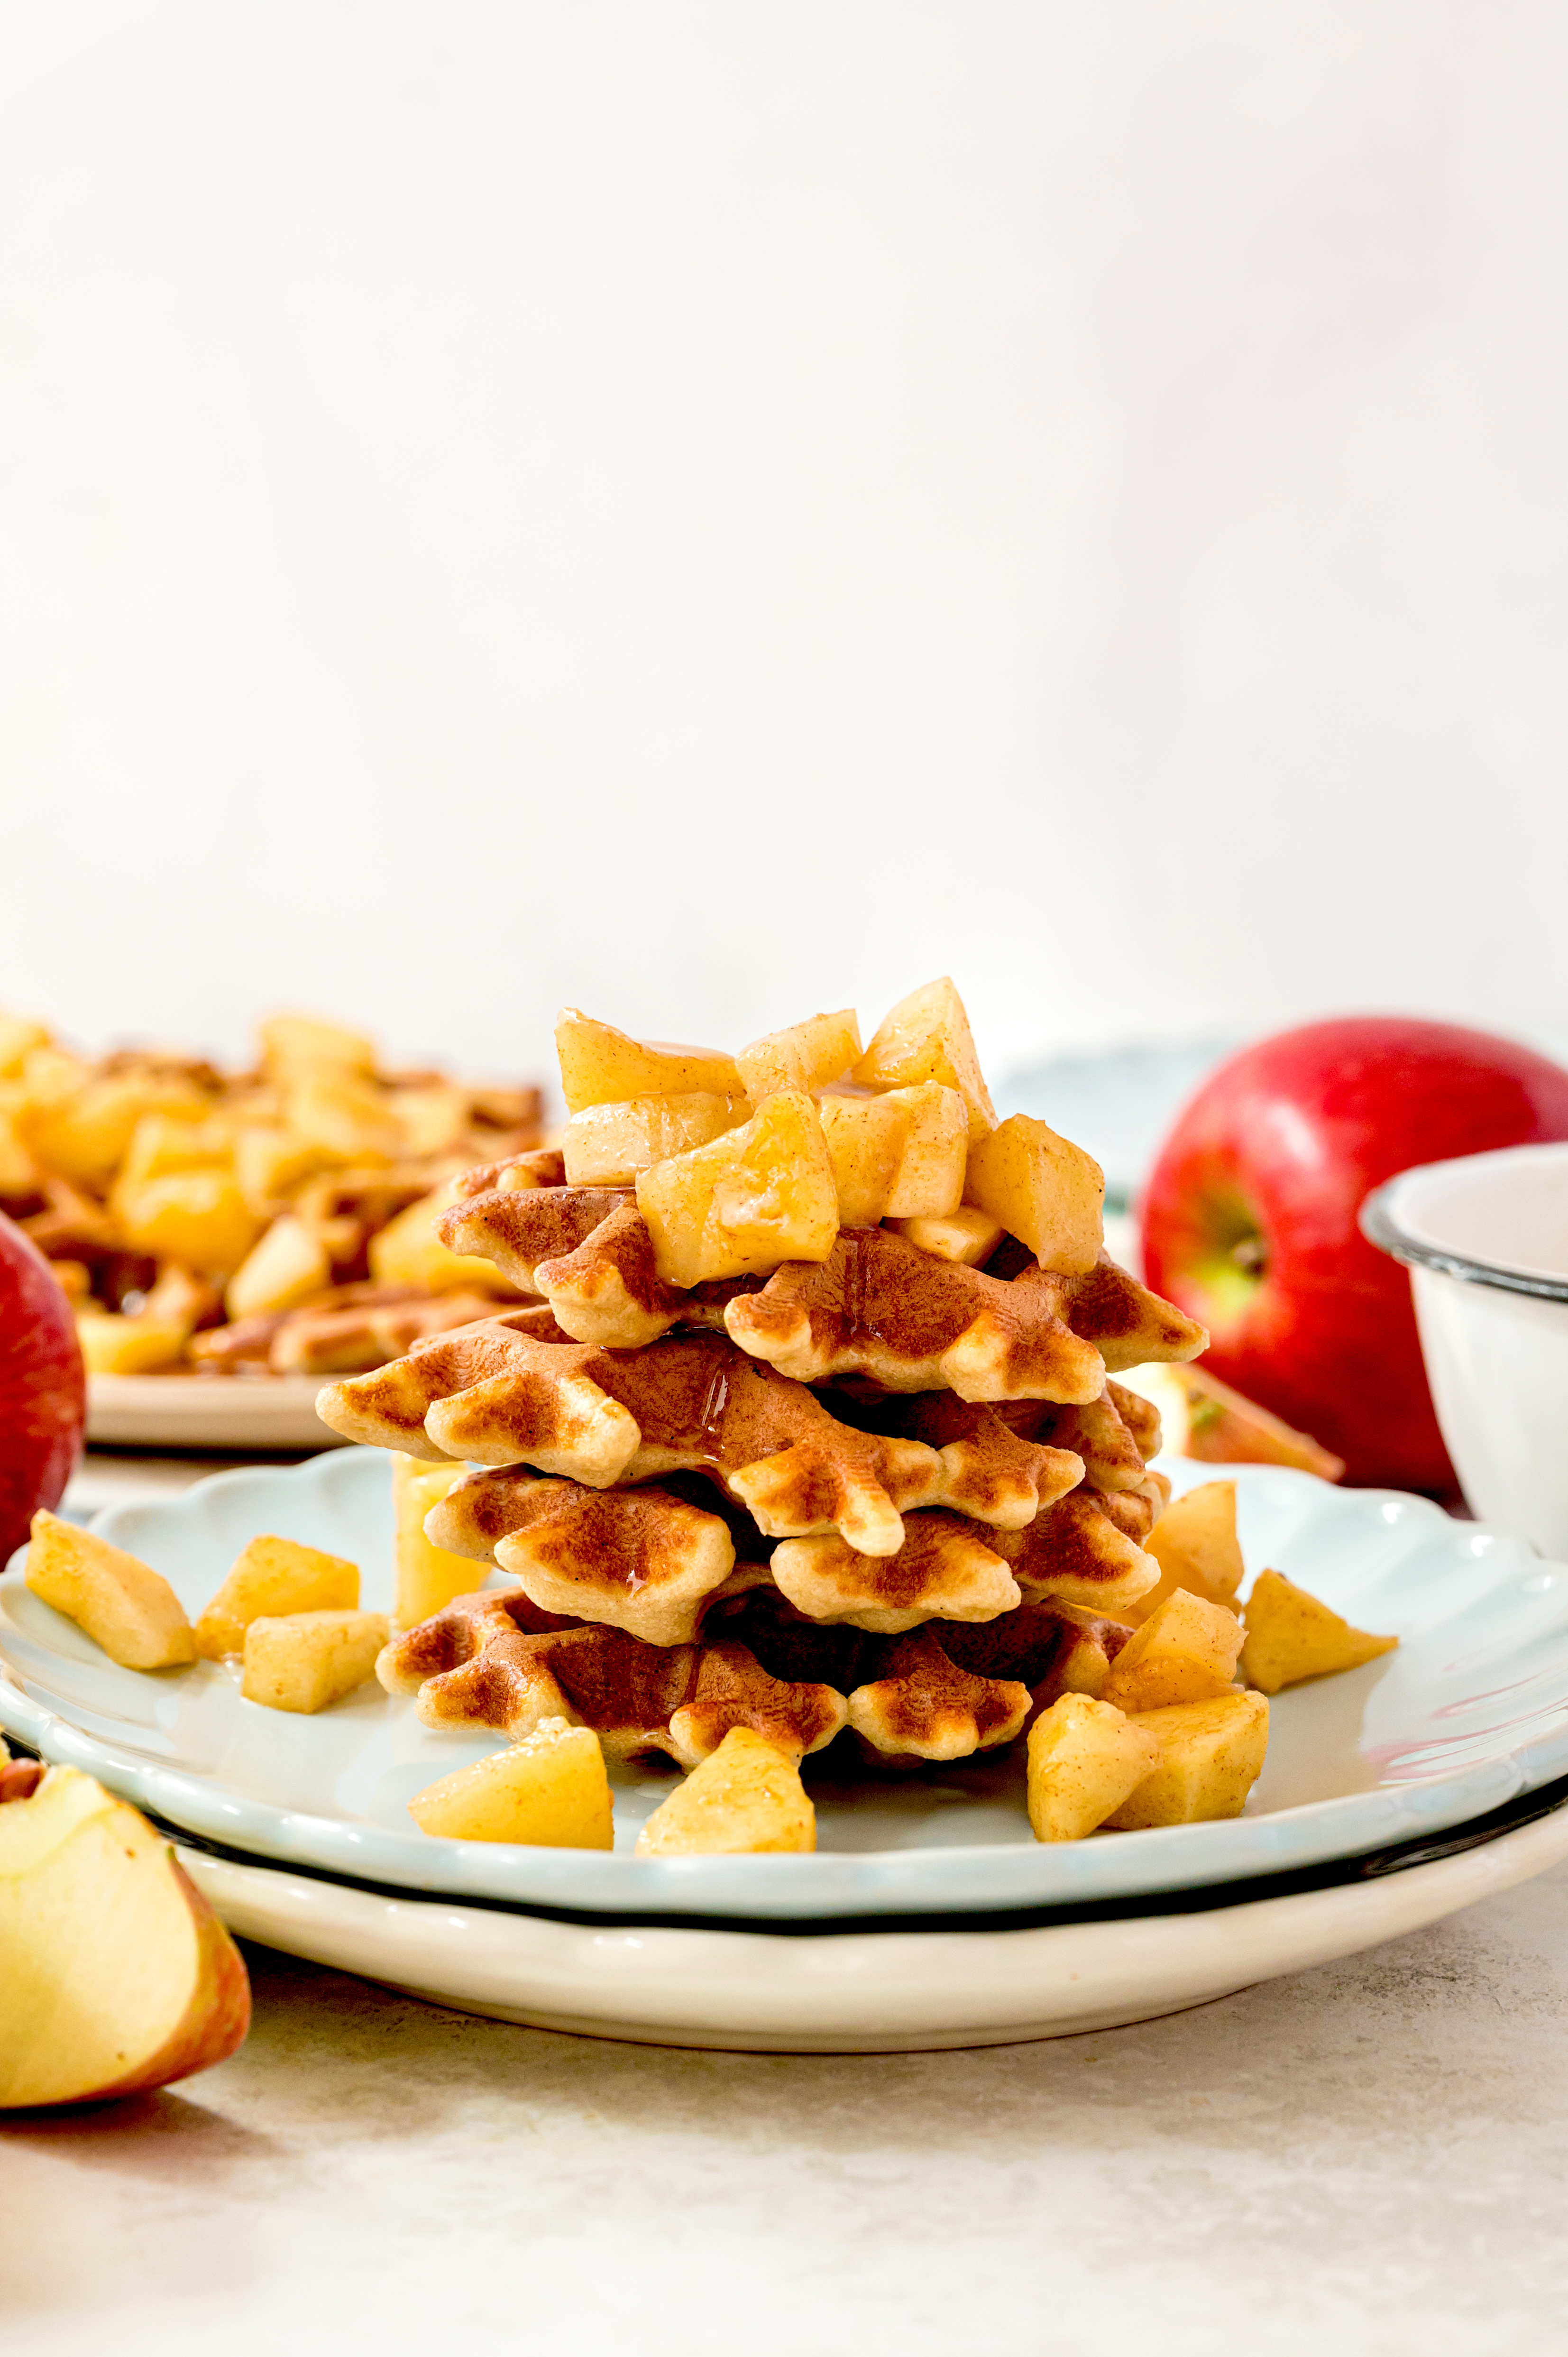 Gluten-Free Mini Waffles with Cinnamon Apple Topping on a plate